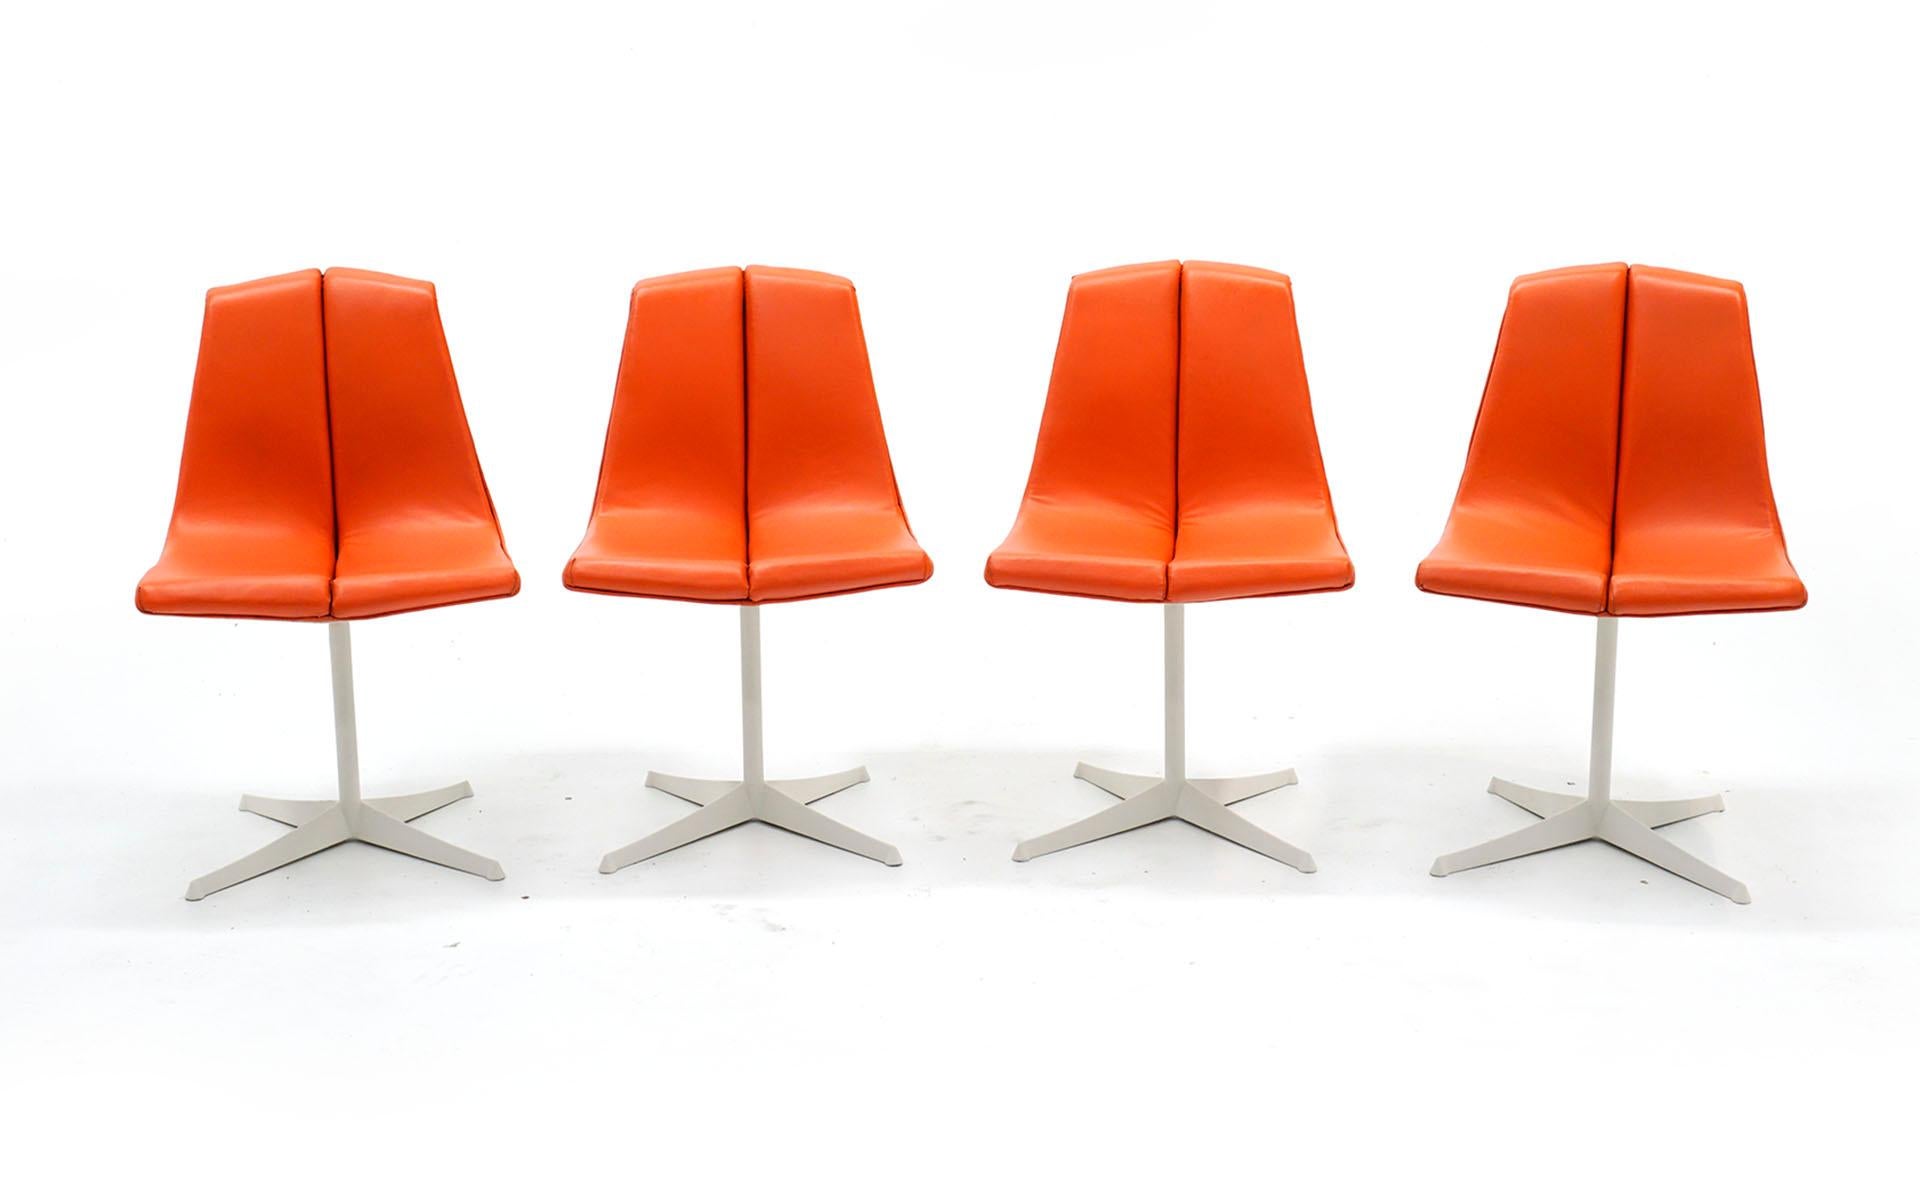 Set of 8 Richard Schultz dining chairs, made by Knoll, 1960s. The frames and seat backs have been expertly refinished in a soft white / ivory color and the original red orange seats have been restored and are in excellent condition with few, if any,